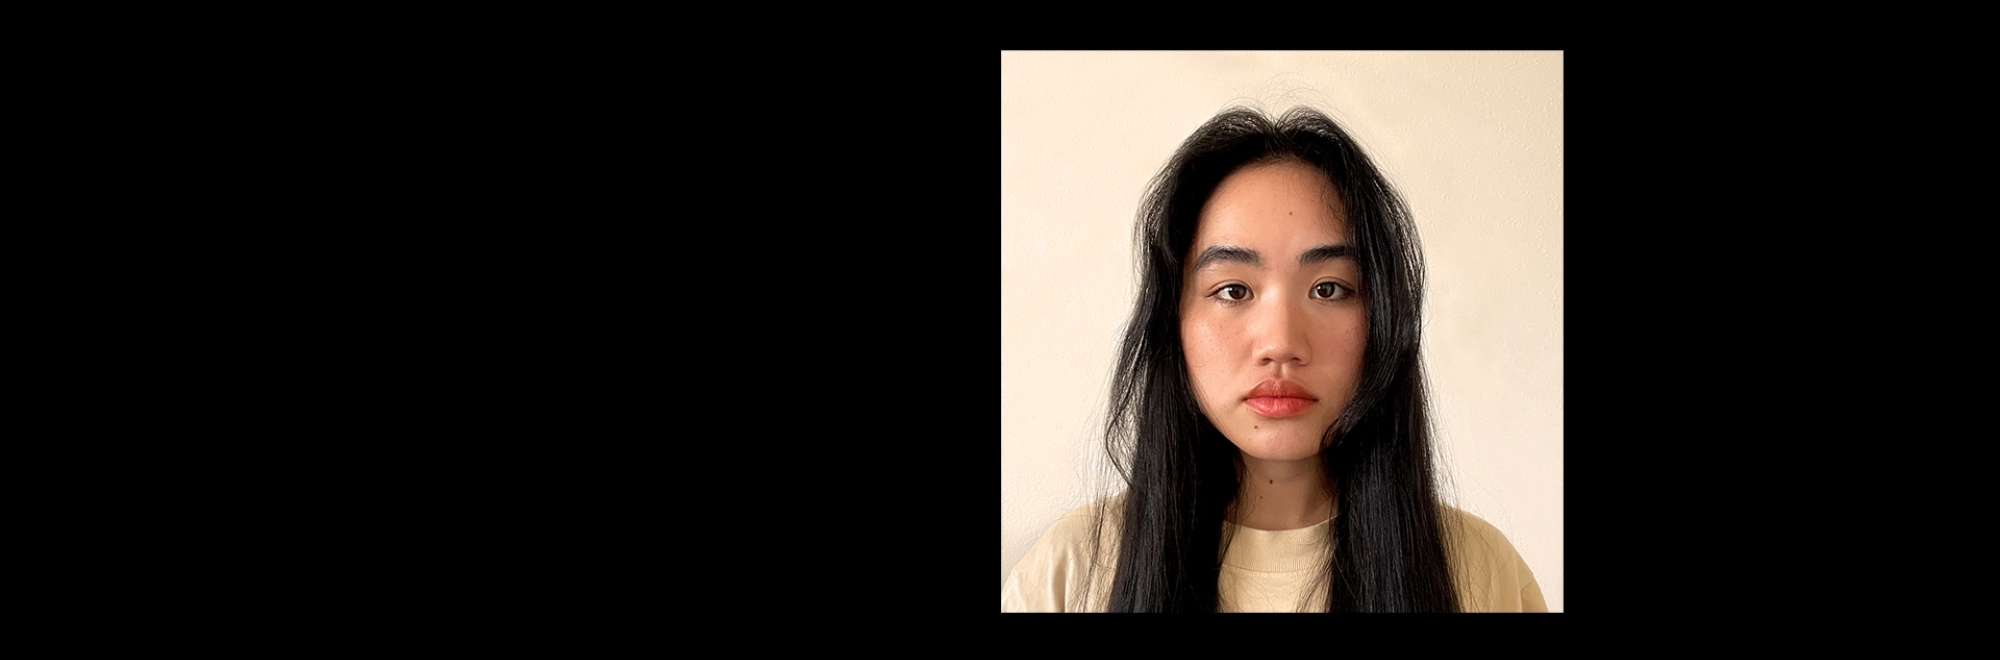 Wieden+Kennedy film campaigns against rising levels of Asian hate crime